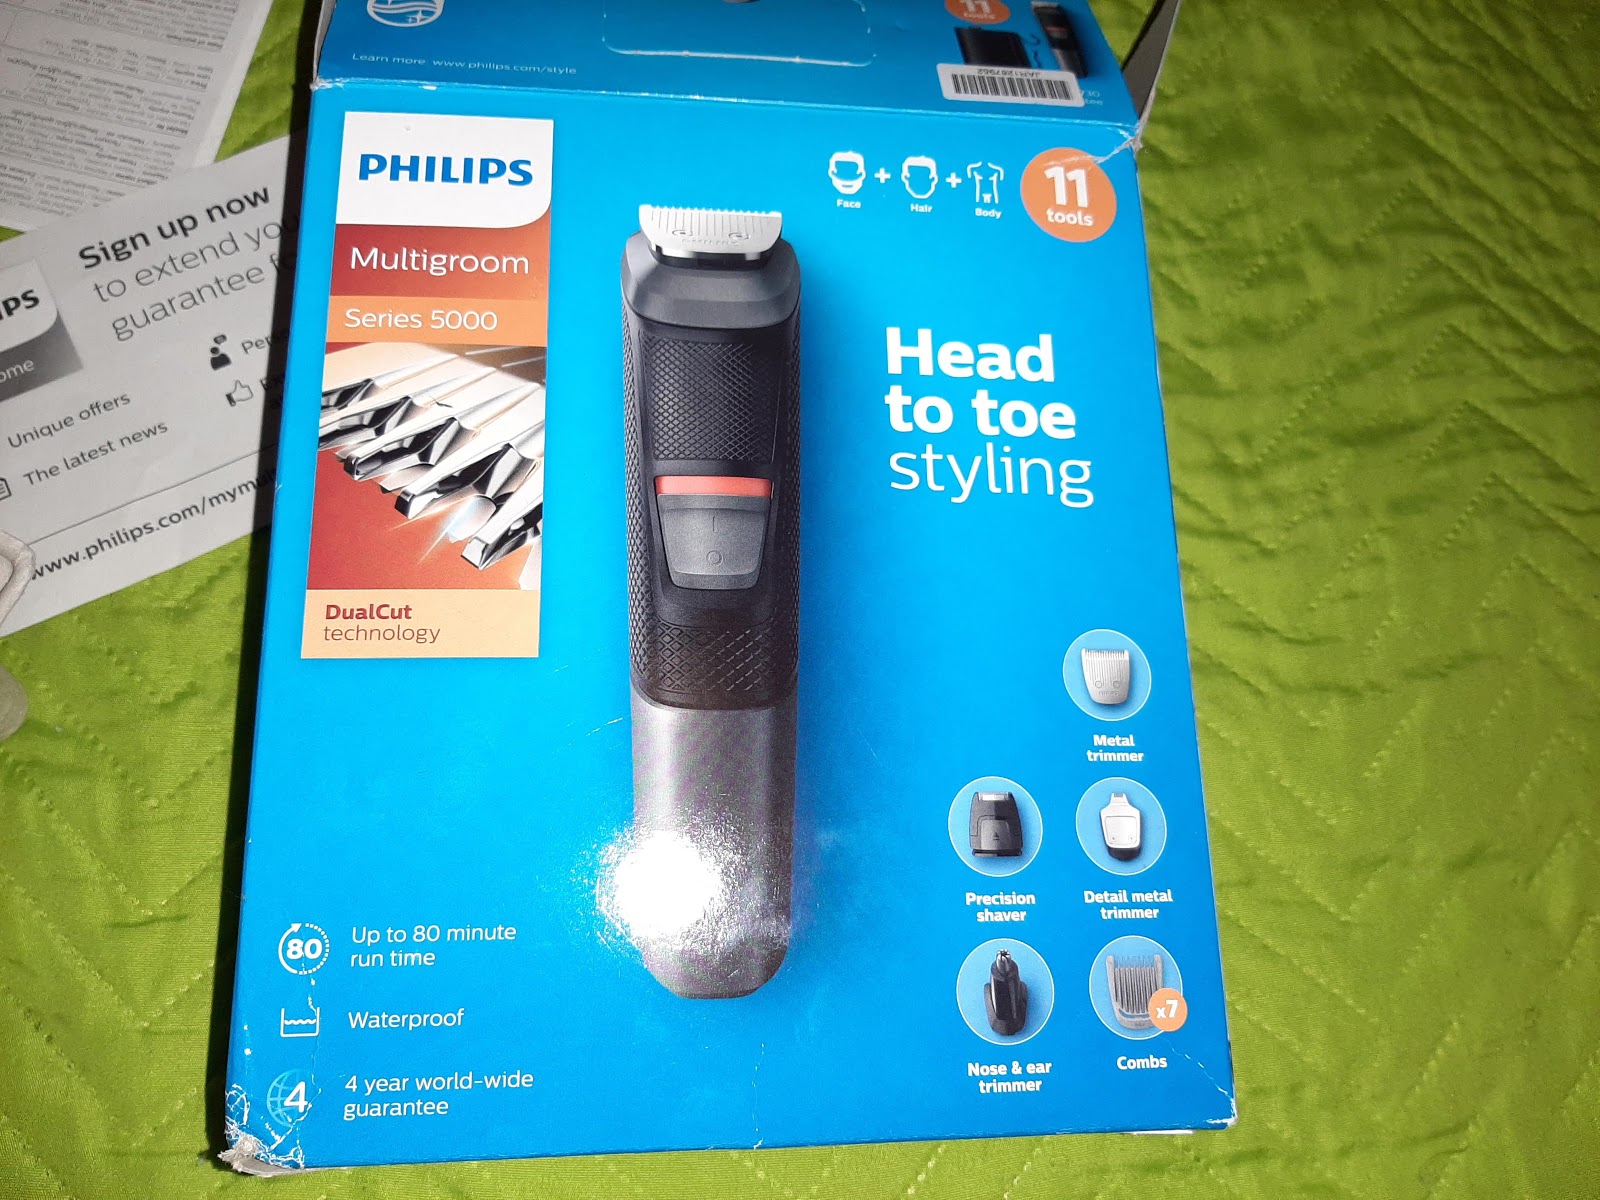 Philips Multigroom series 5000 MG5720 - first review